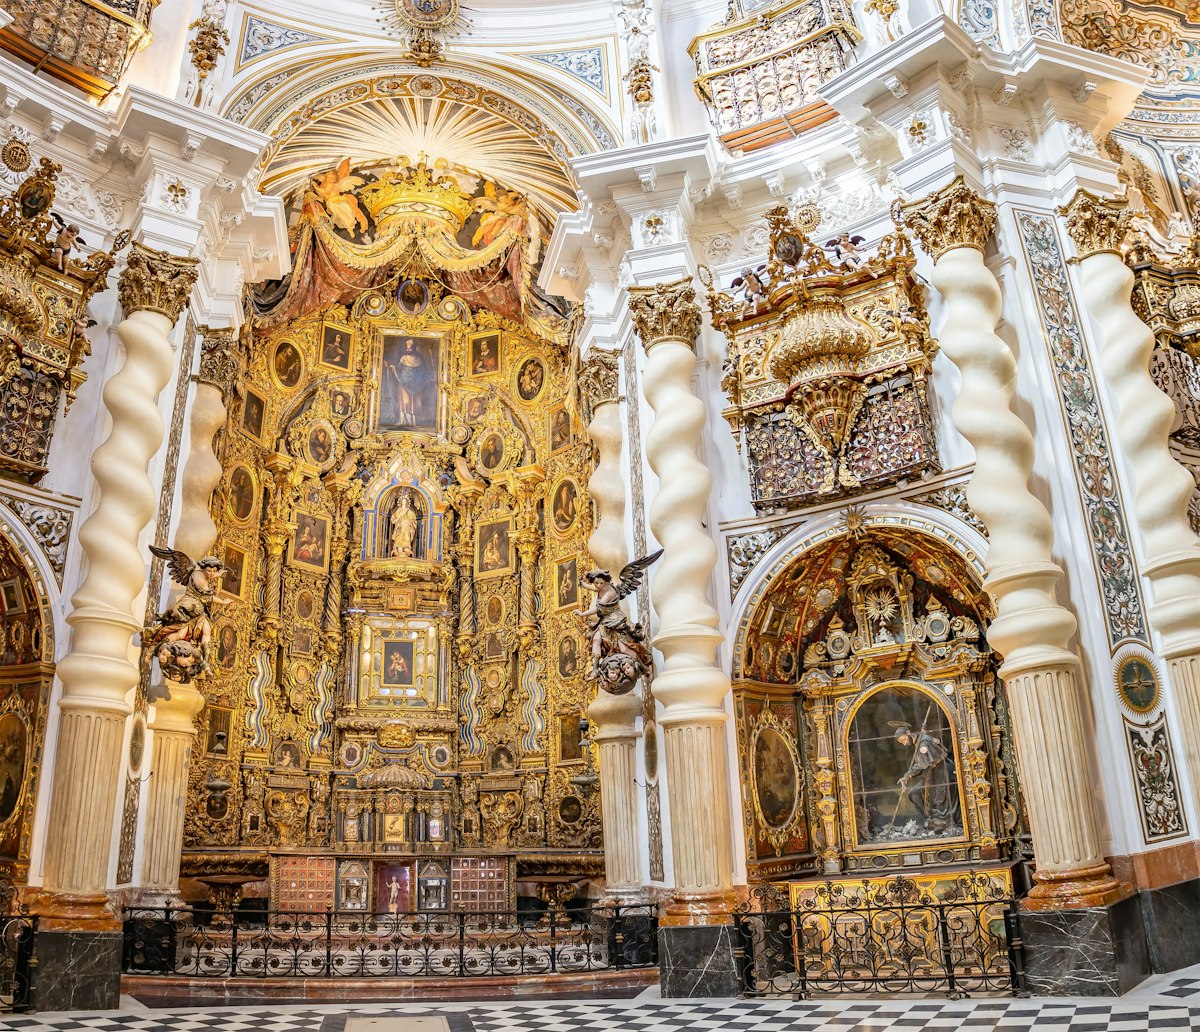 Altarpiece inside the Church of San Luis de los Franceses of baroque architecture from the 18th century in the historic center of Seville, Andalusia, Spain.